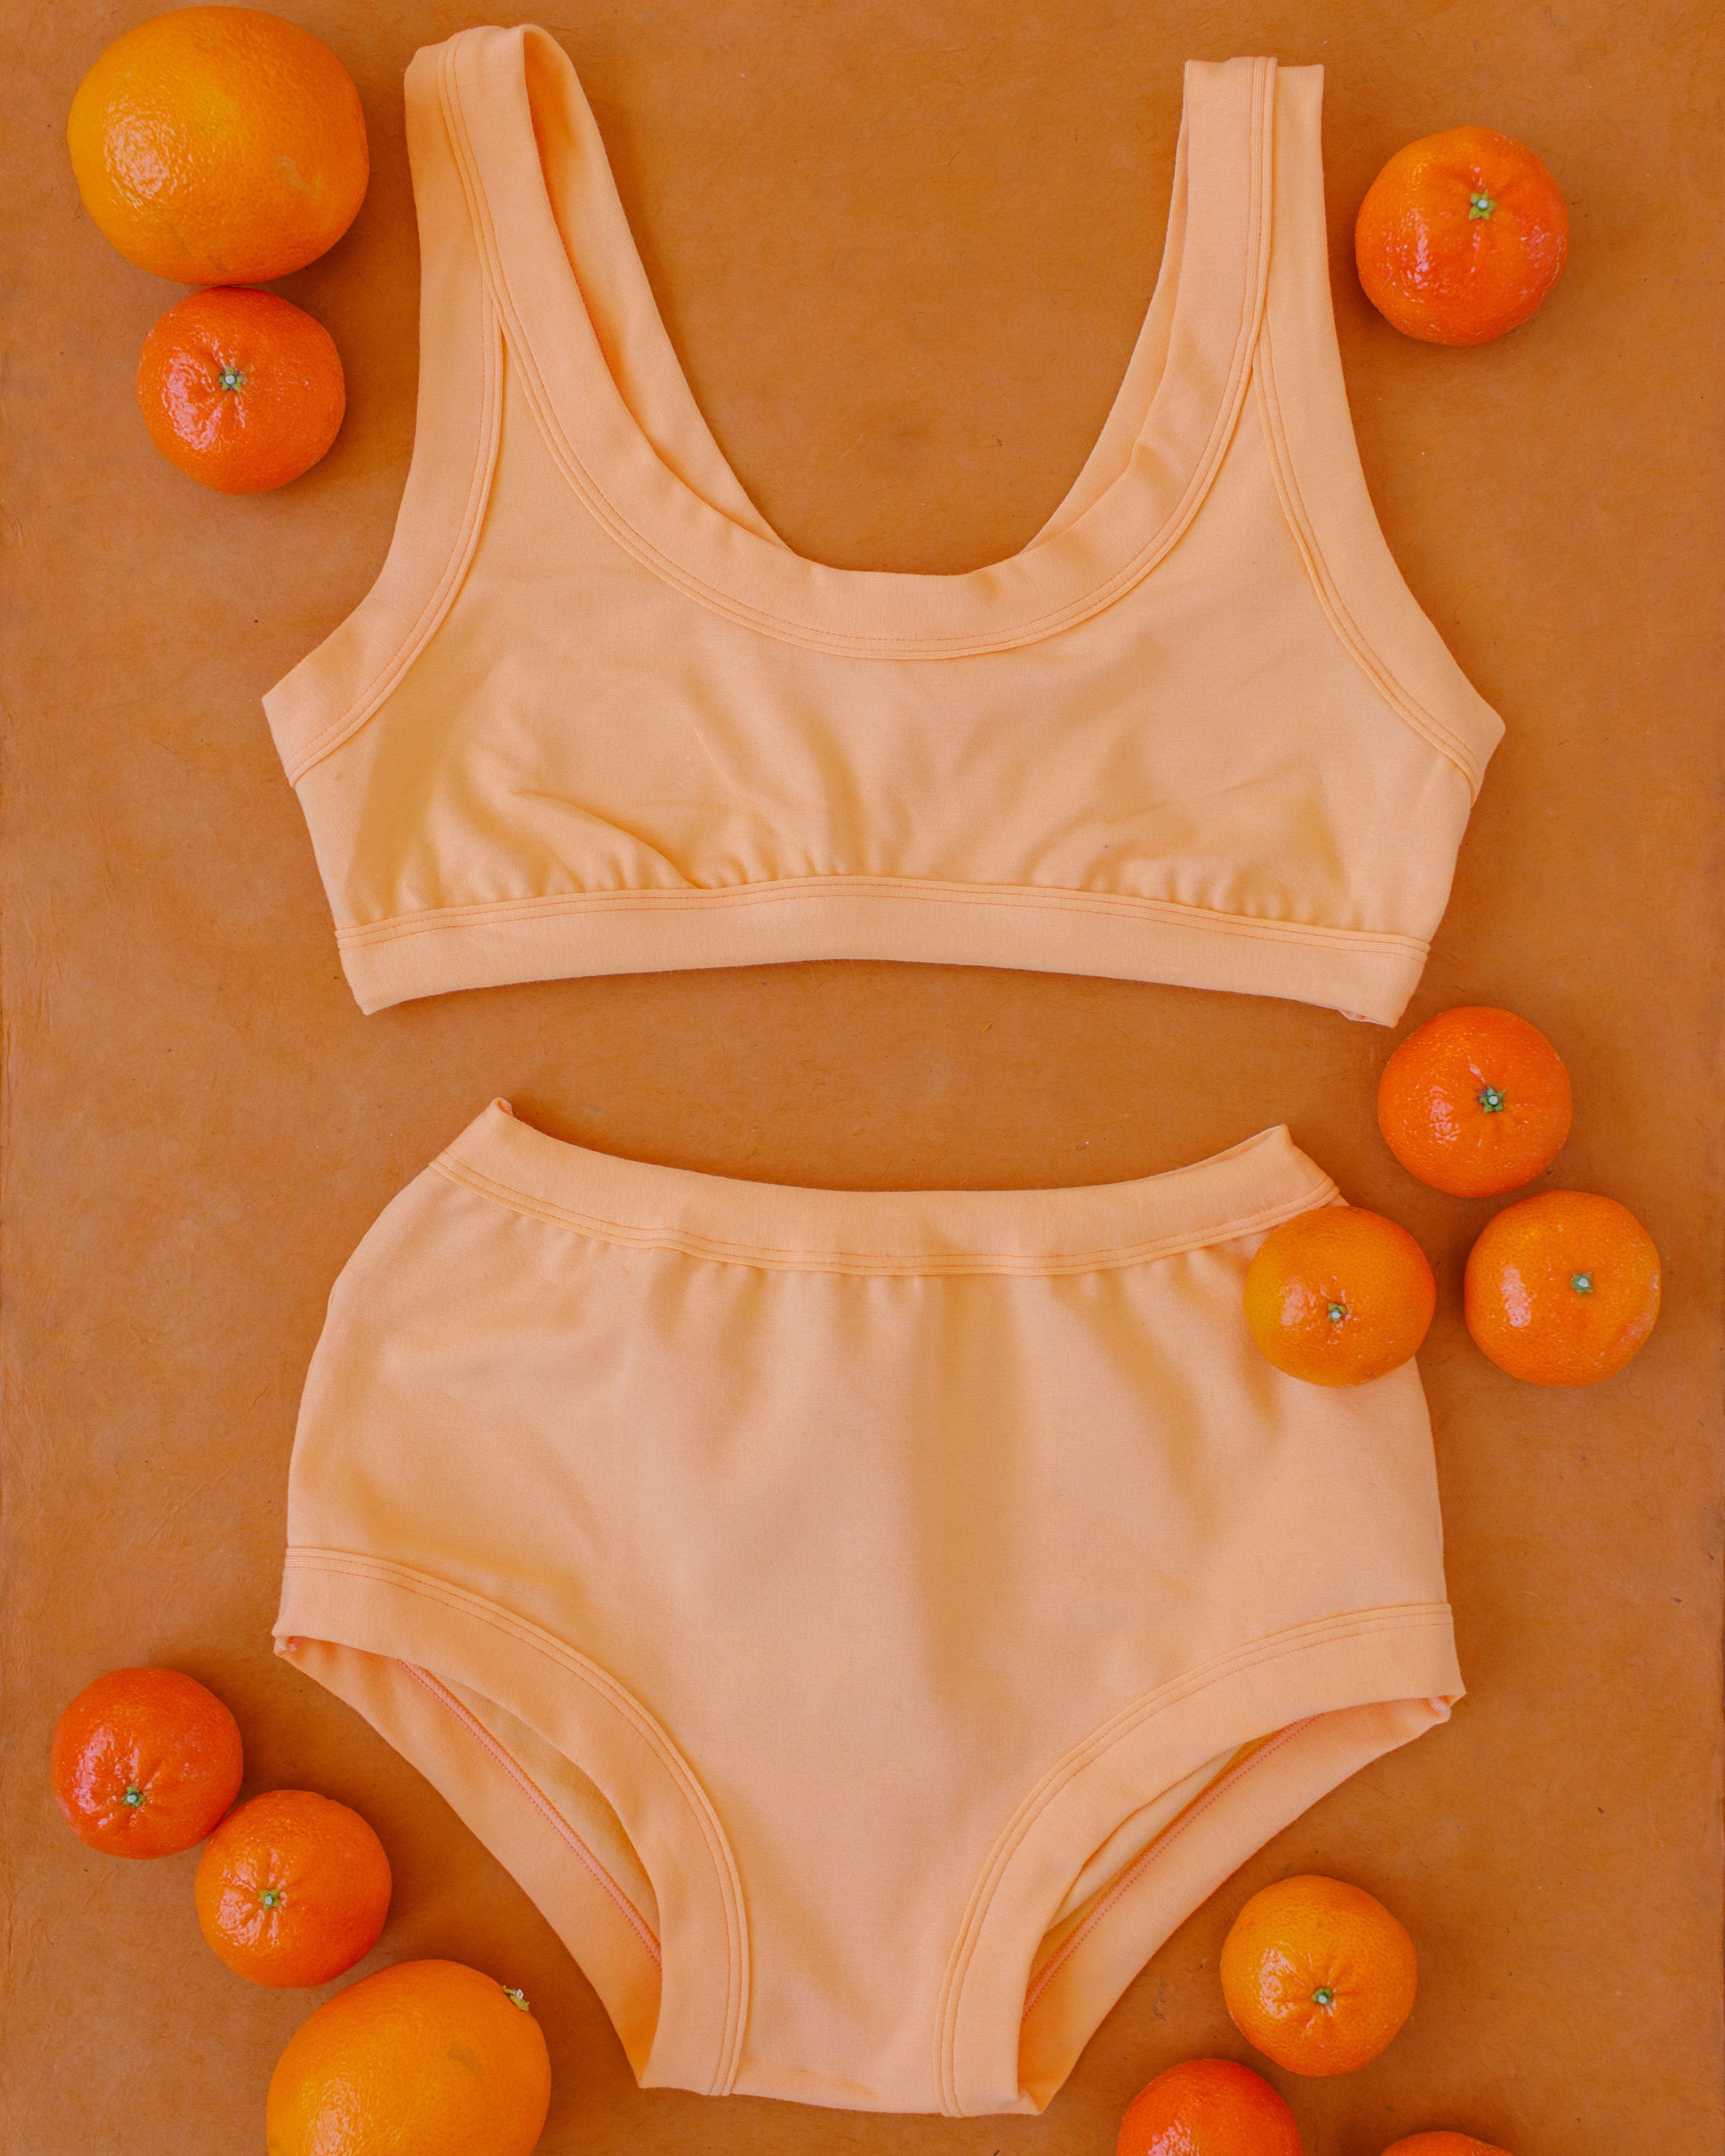 Flat lay of an Orange Sherbet set of Original style underwear and Bralette with oranges surrounding it.